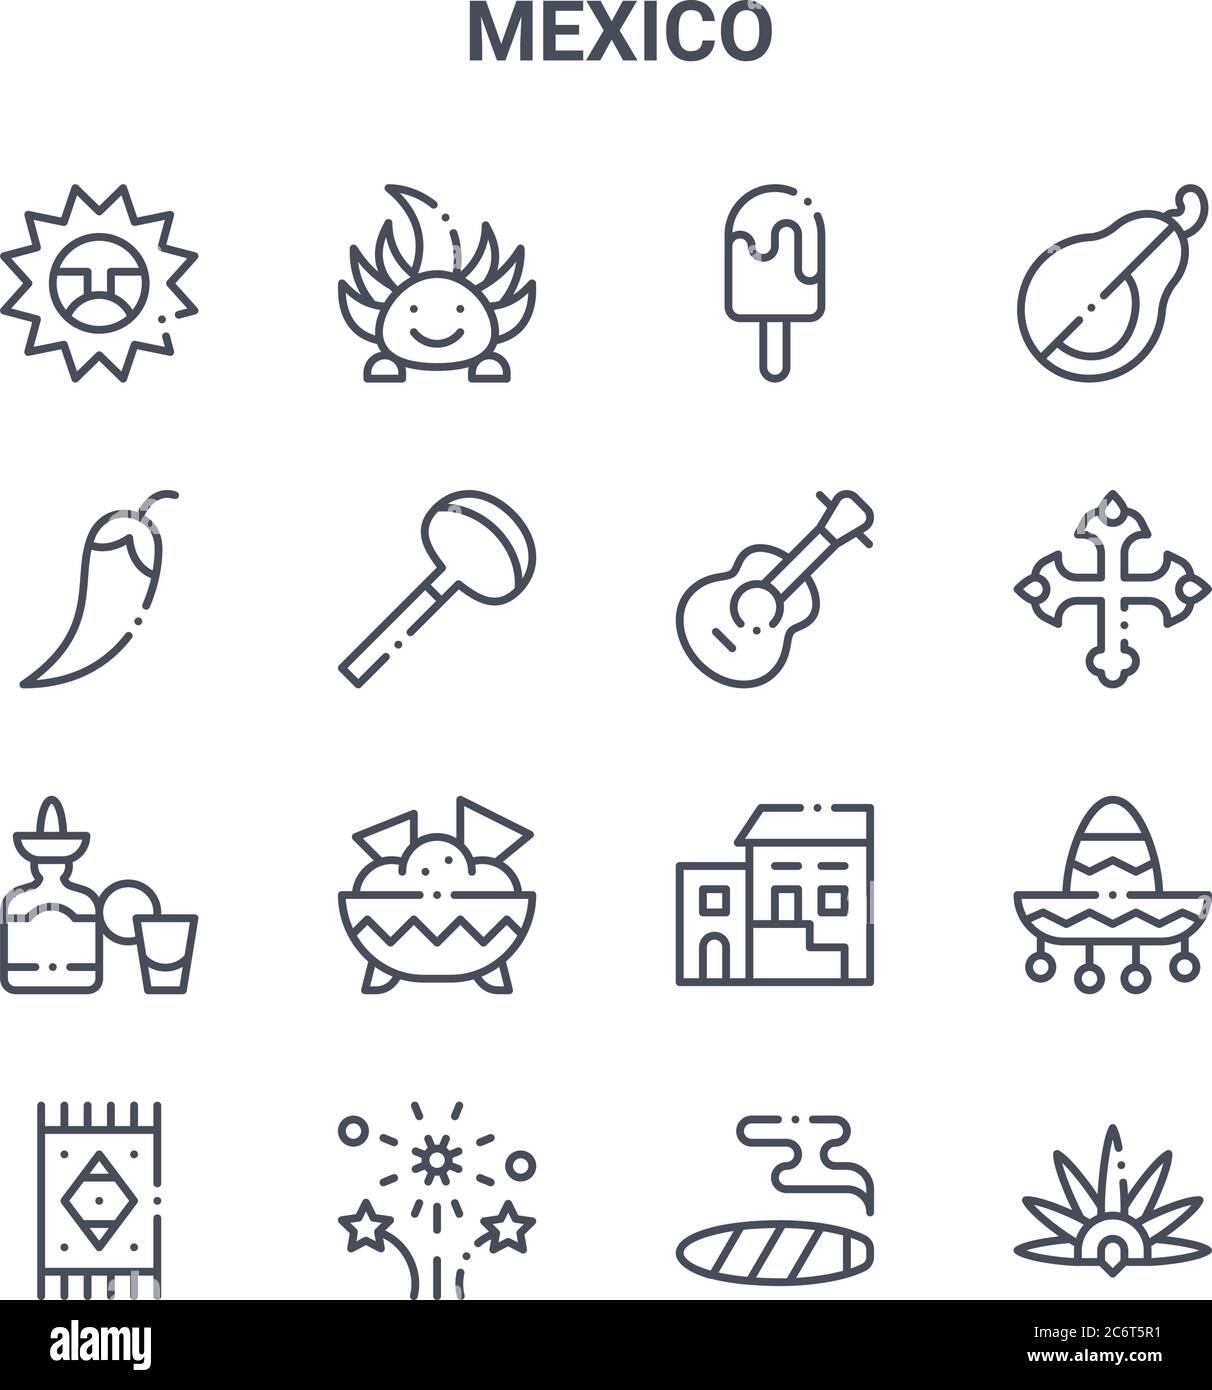 set of 16 mexico concept vector line icons. 64x64 thin stroke icons such as ajolote, chilli, cross, traditional, fireworks, headdress, cigar, guitar, Stock Vector